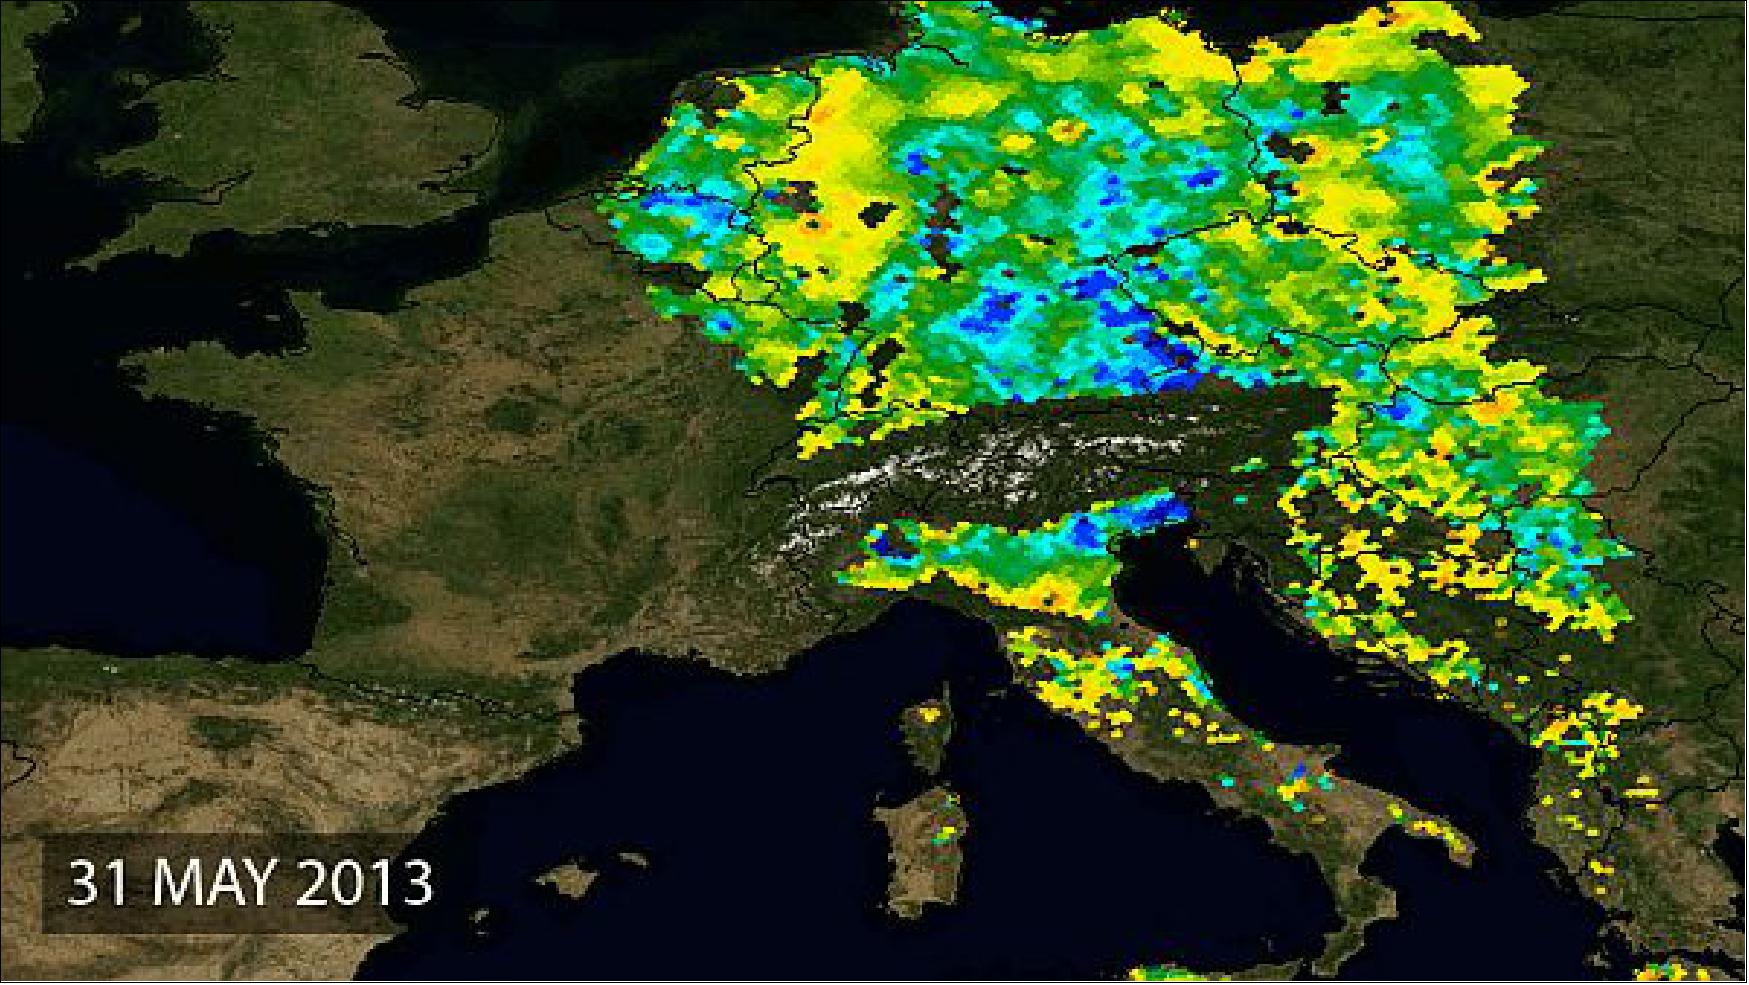 Figure 68: SMOS soil surface layer moisture map of May 31, 2013 (image credit: ESA)